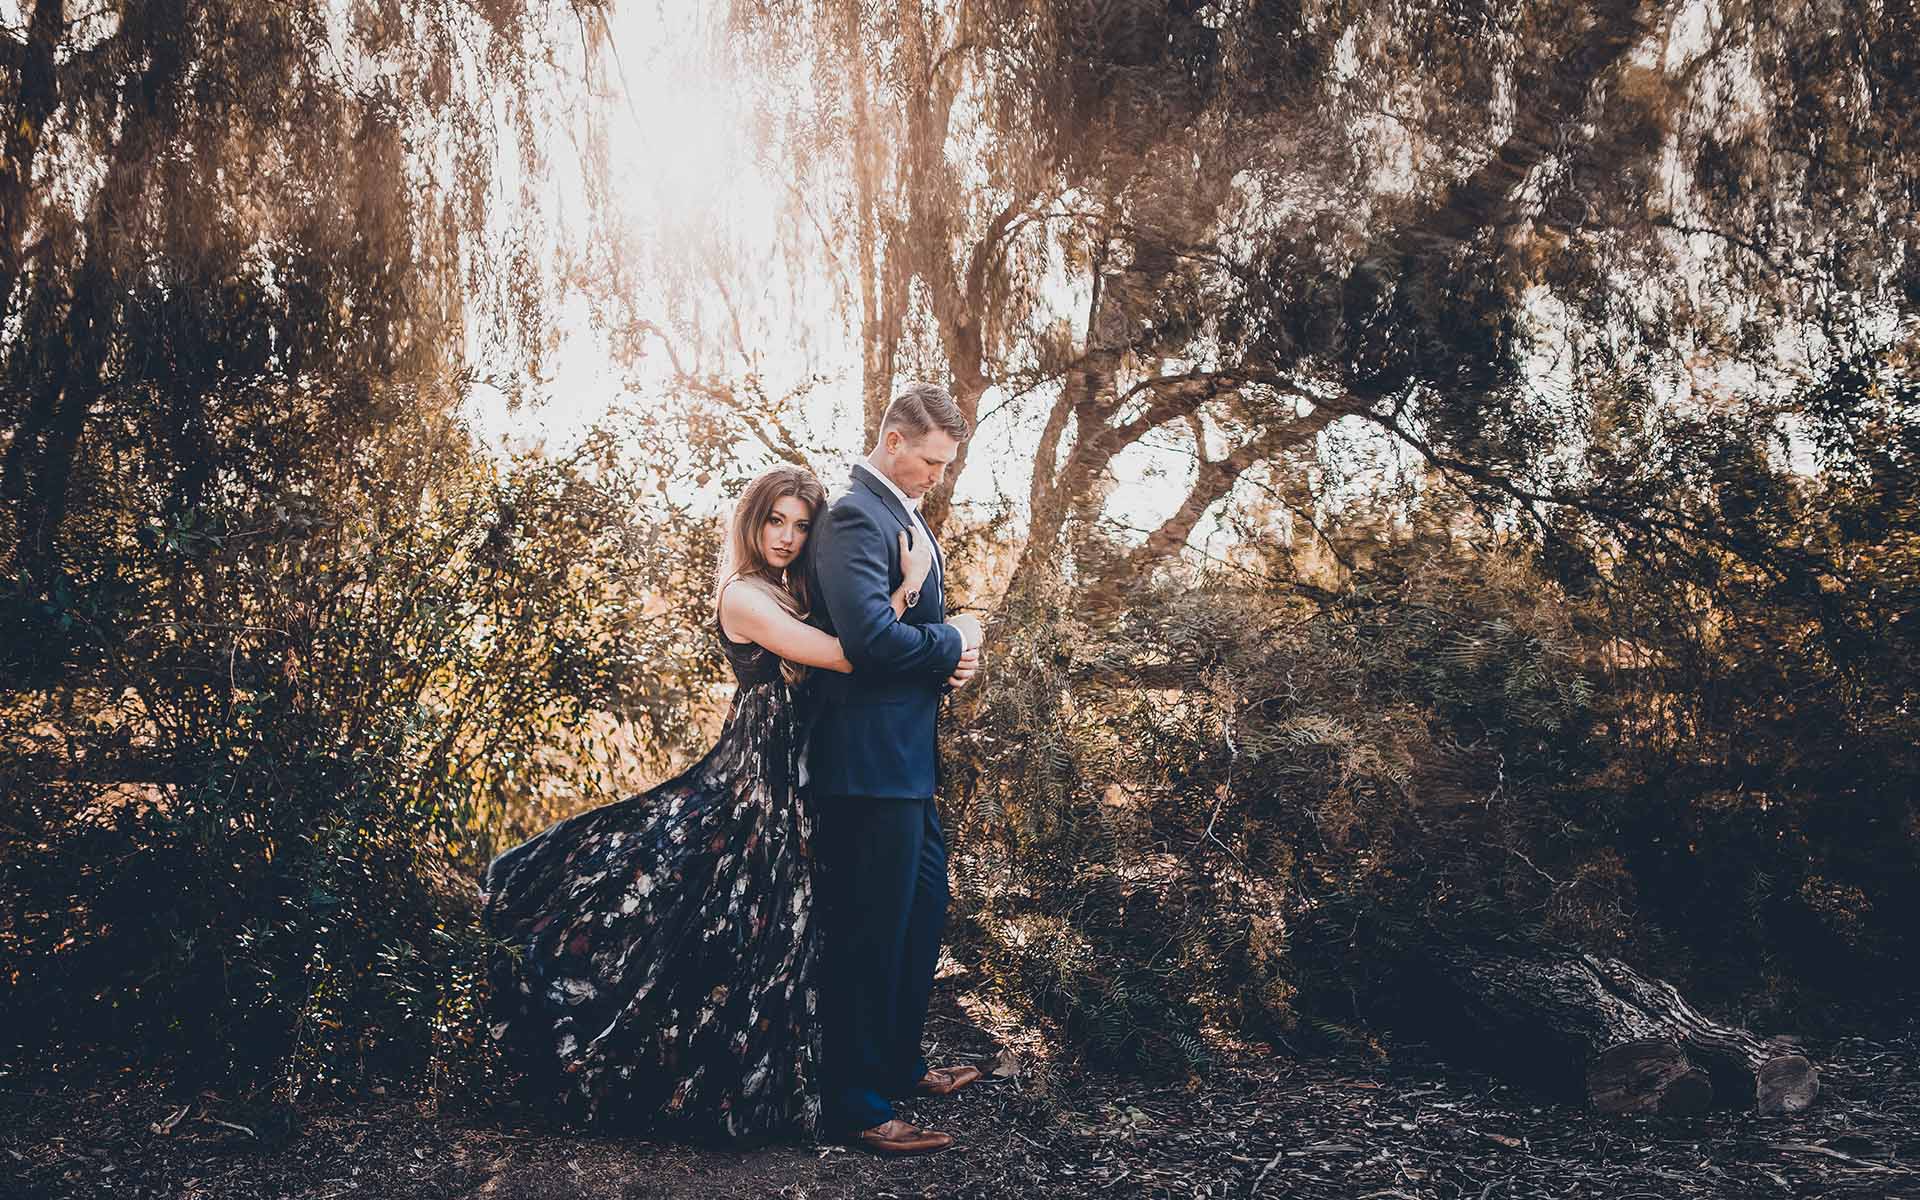 Carbon Canyon Orange County engagement session at sunrise by trees